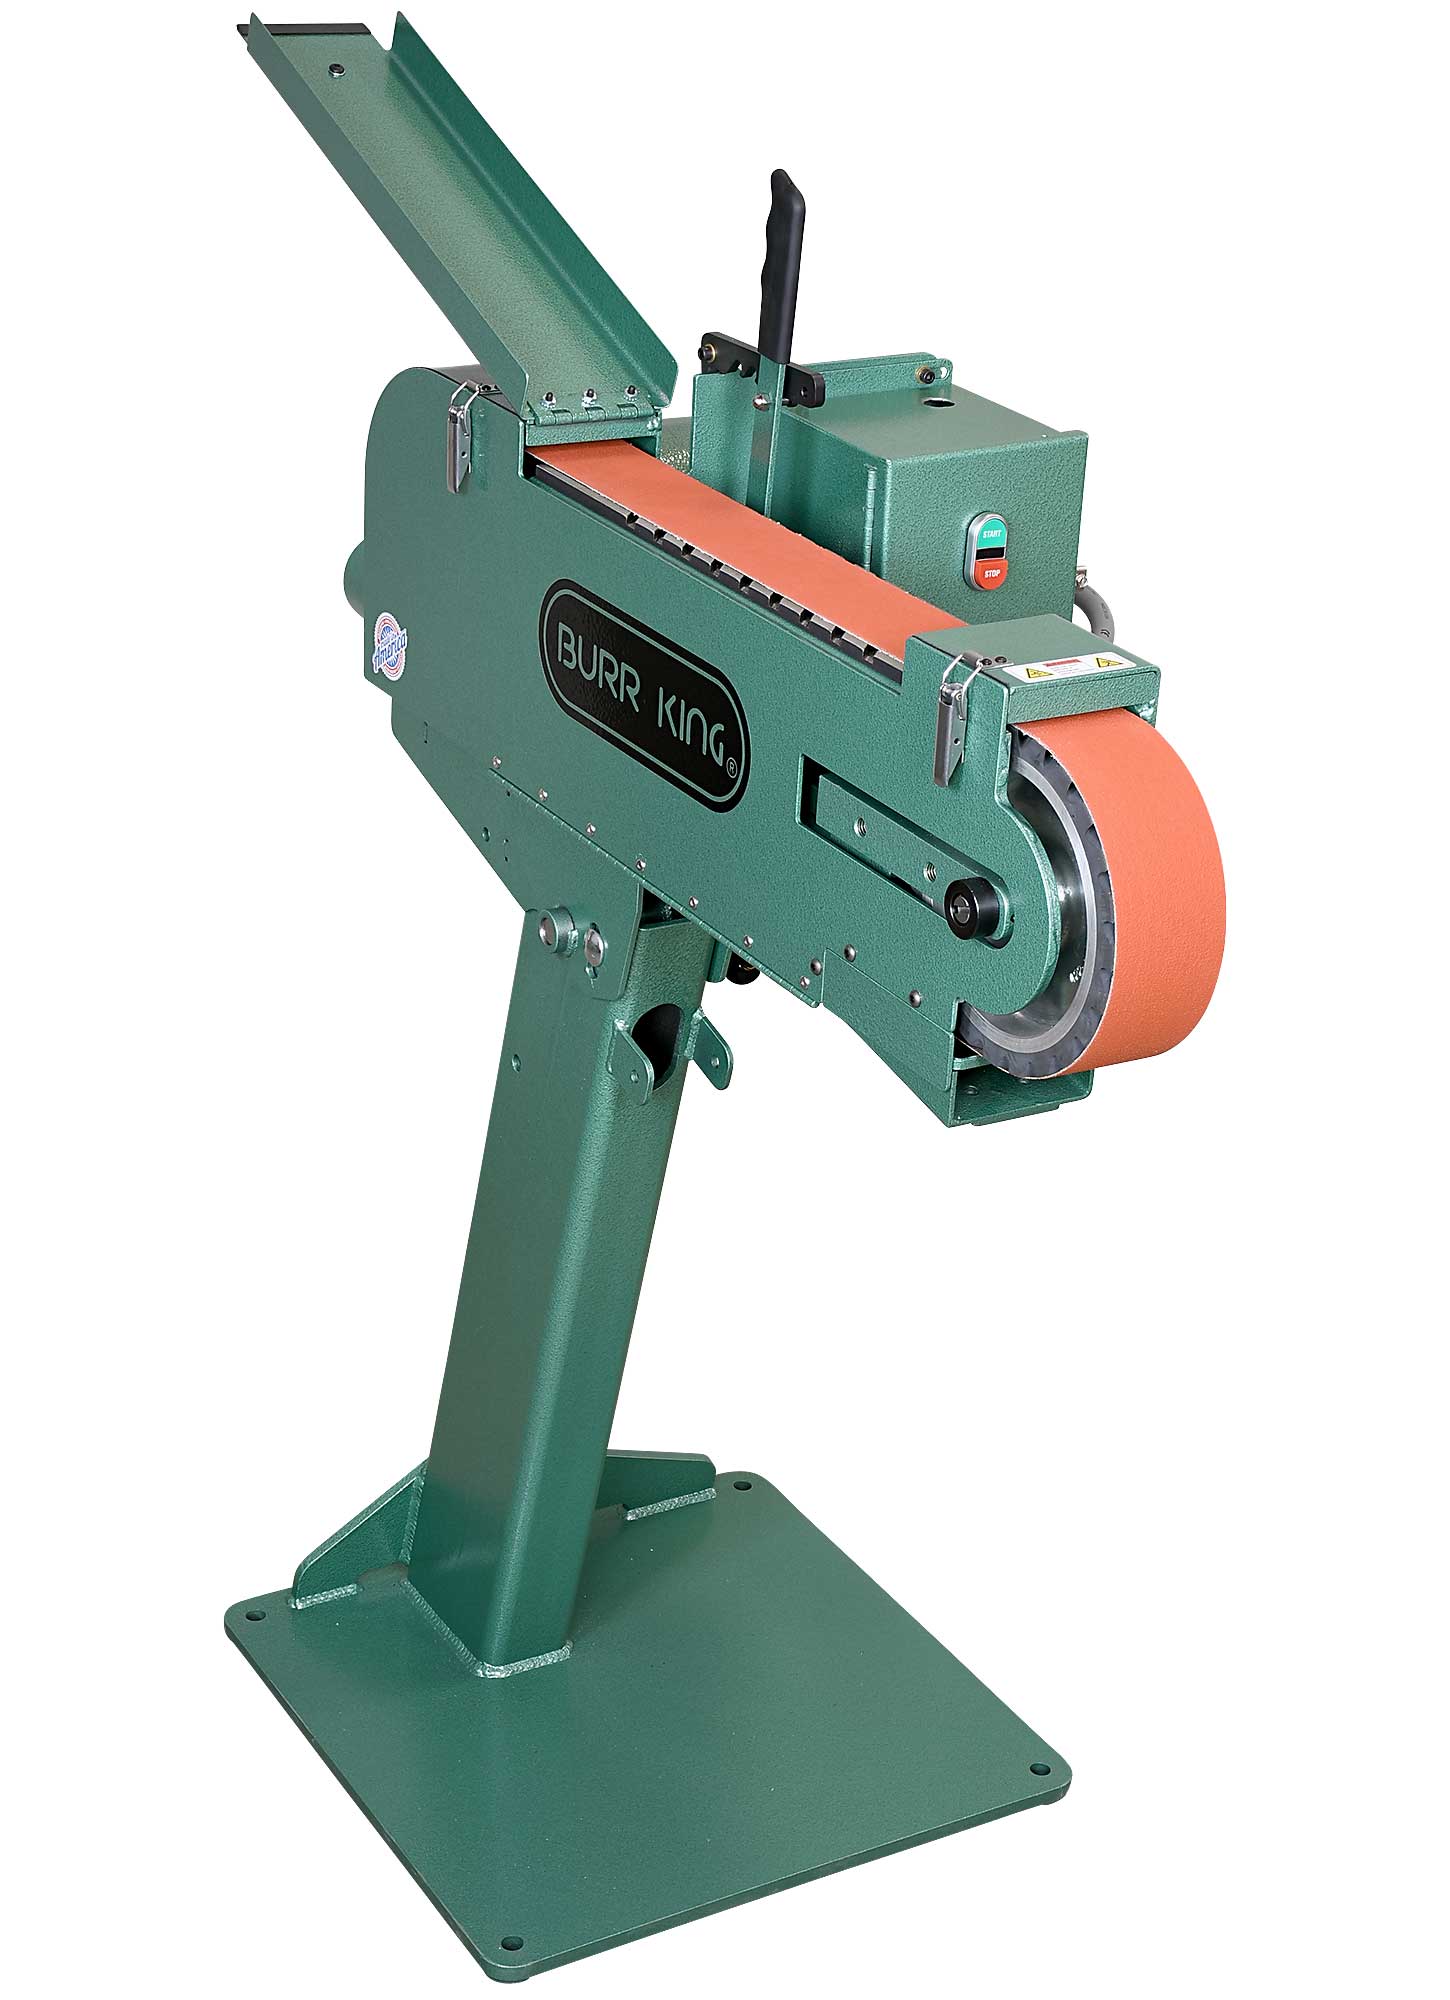 17303 - 979 Belt grinder from Burr King with a 3HP motor and operates on 220 volts / 3 phase power